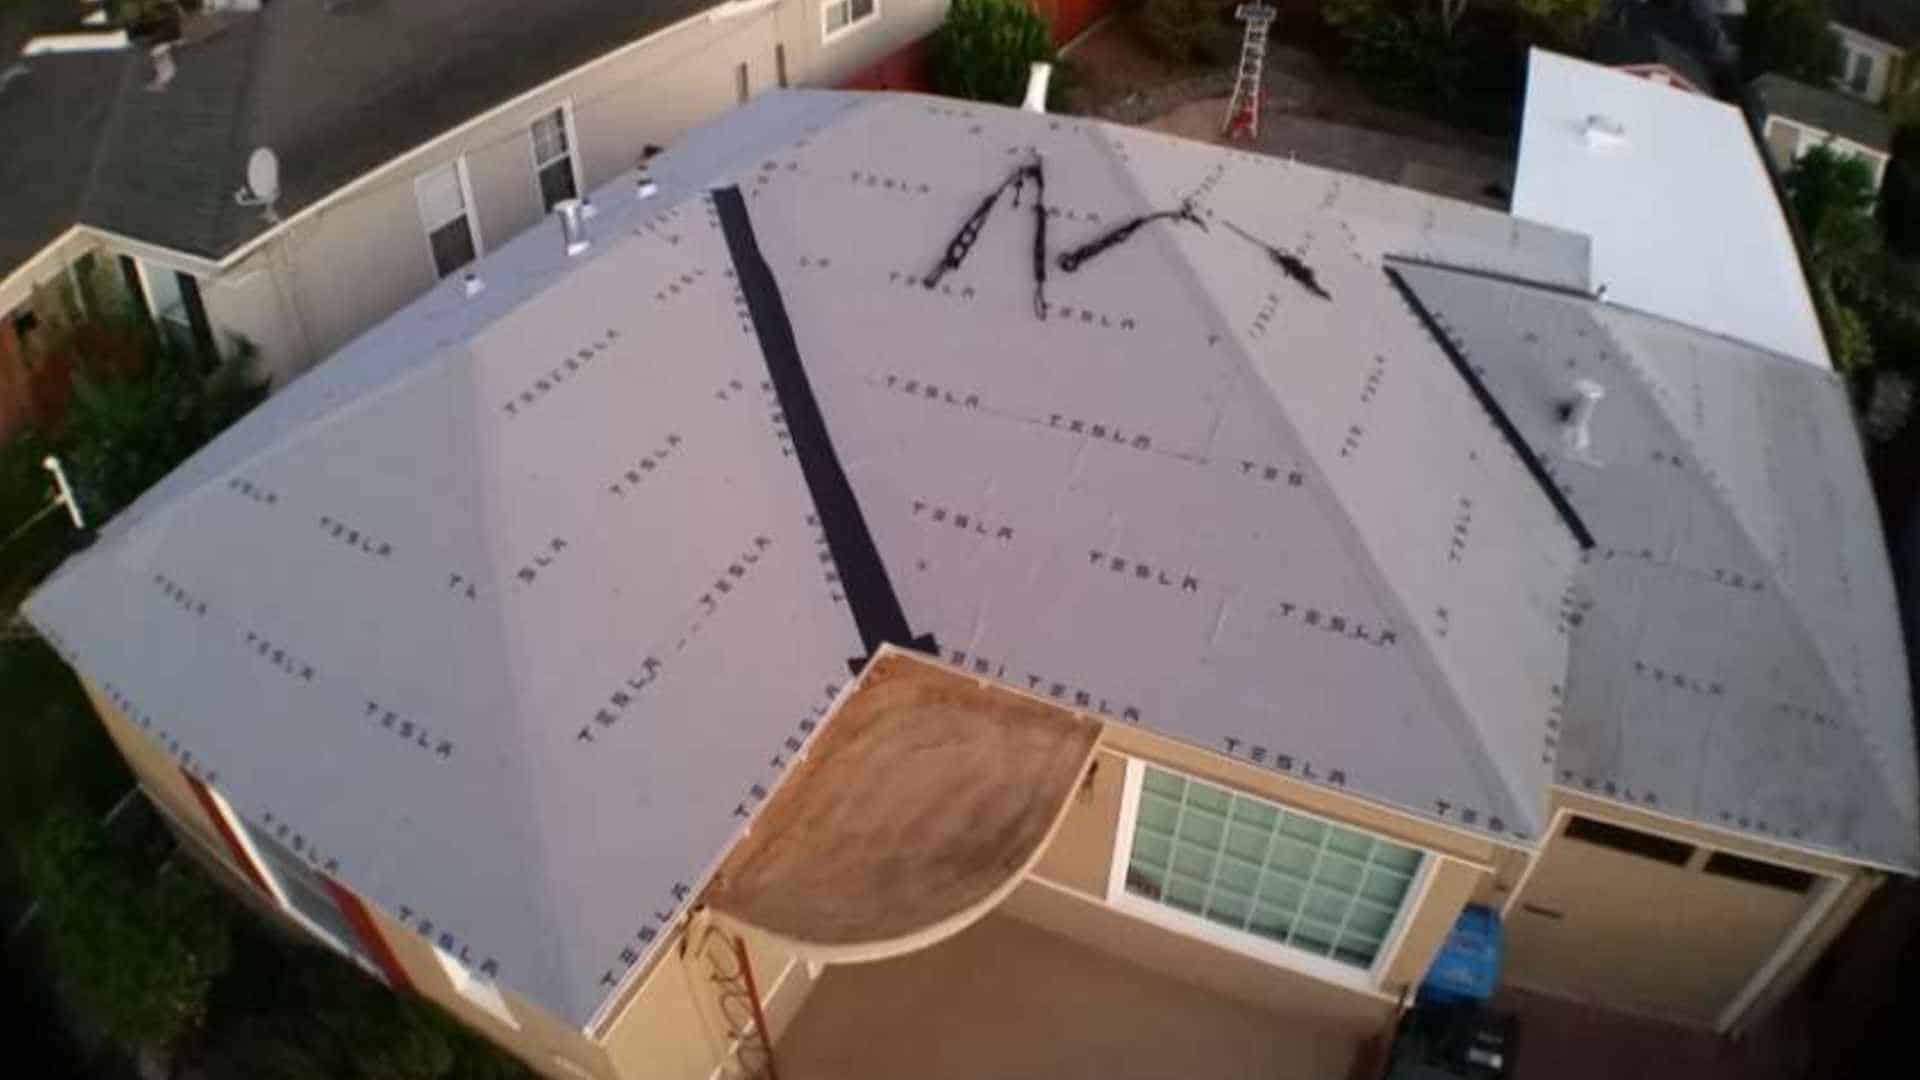 Tesla Solar Roof Install Day 1 - 7:30 AM